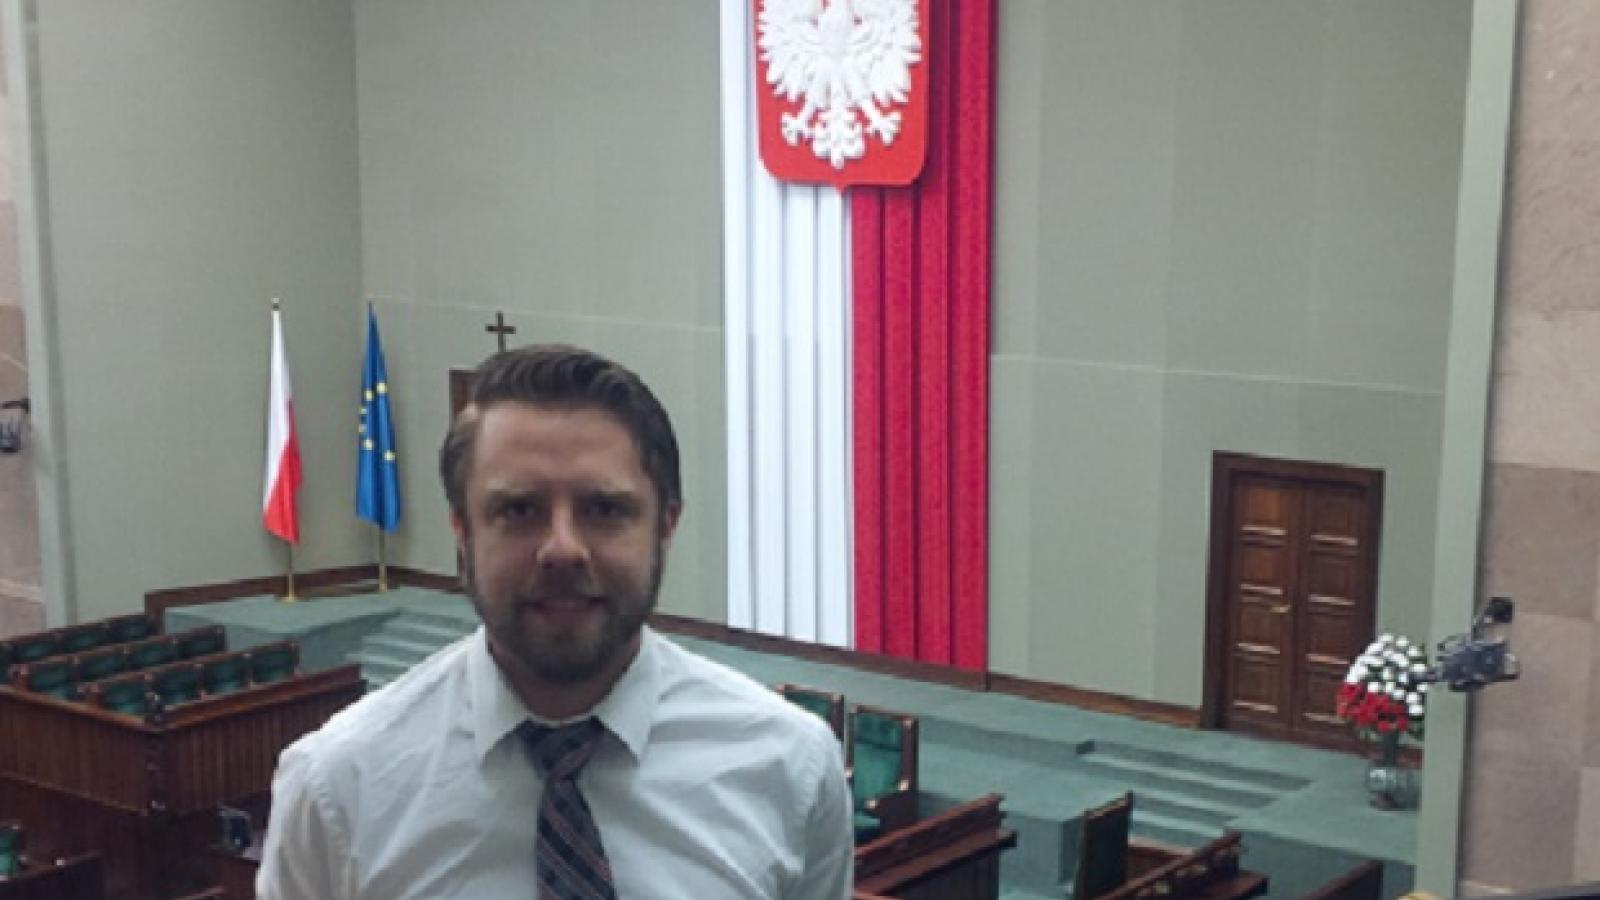 Peter Tunkis at the Press Gallery of the Plenary Hall at the Sejm in Poland